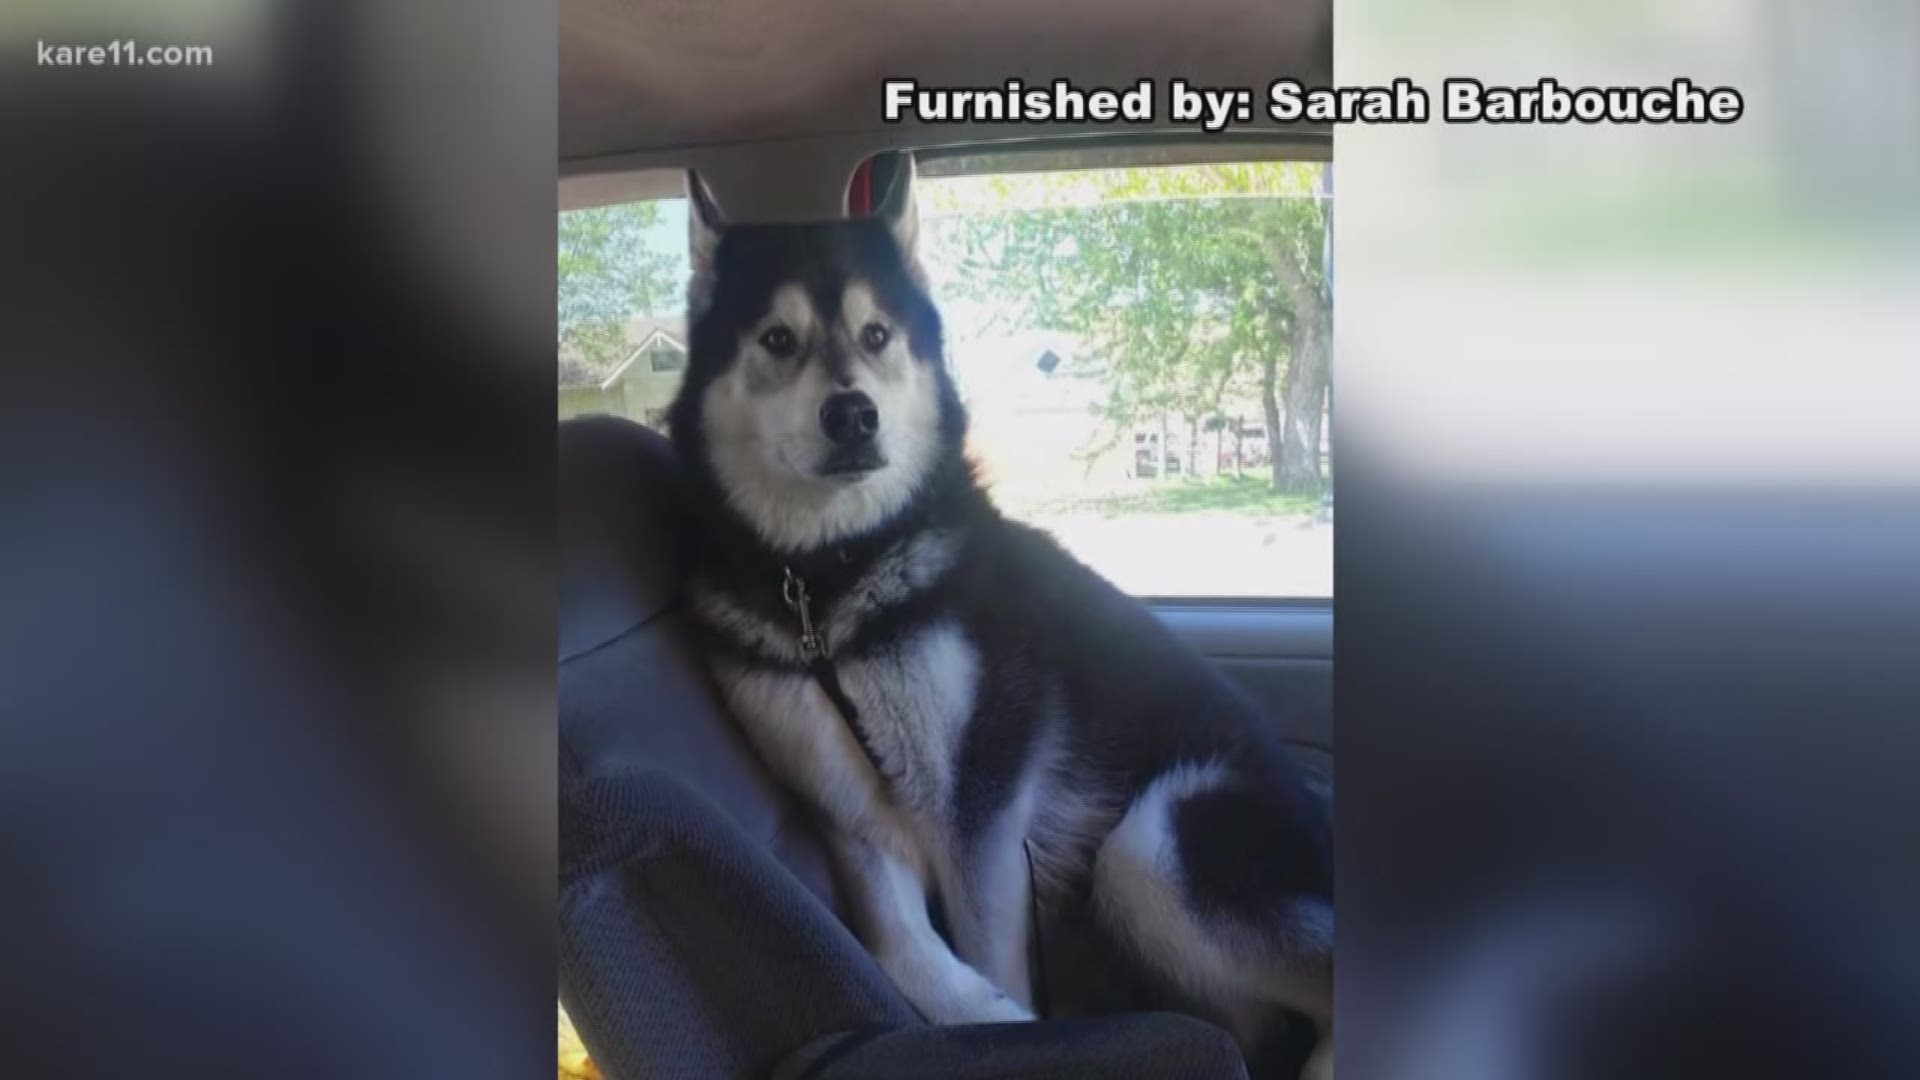 "Just come forth and apologize," said Sarah Barbouche. She and her family are suffering after a driver hit and killed their dog outside their Bloomington home. https://kare11.tv/2JXtcUe